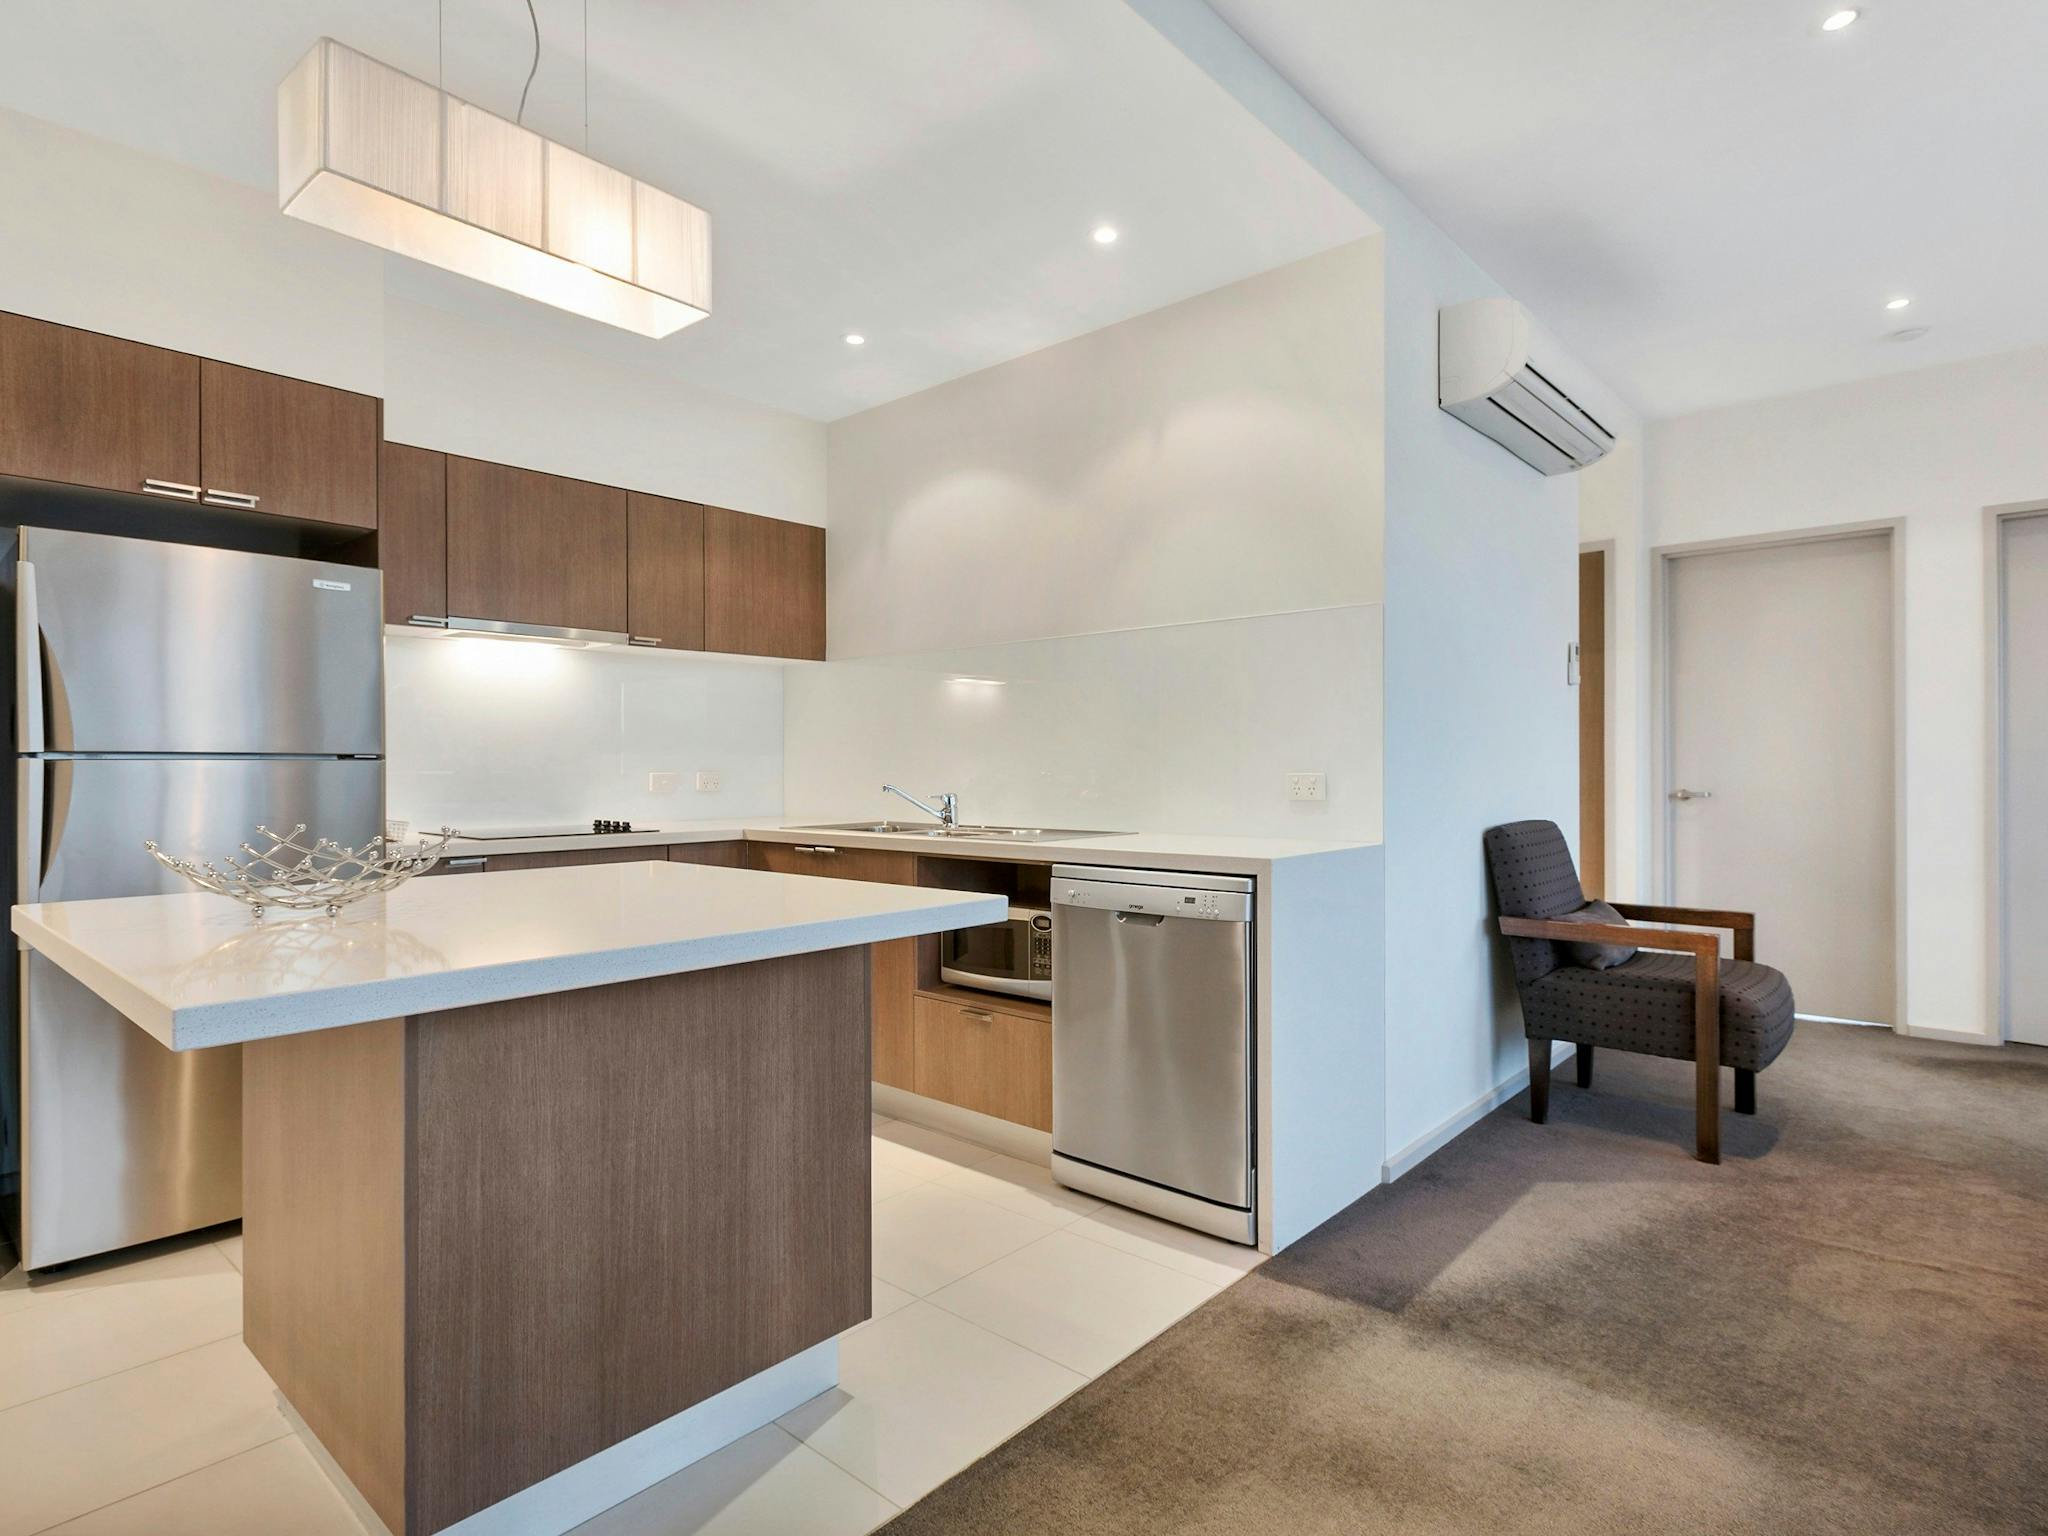 The Gateway's Apartments offer full kitchen facilities and are just perfect for a group or long stay